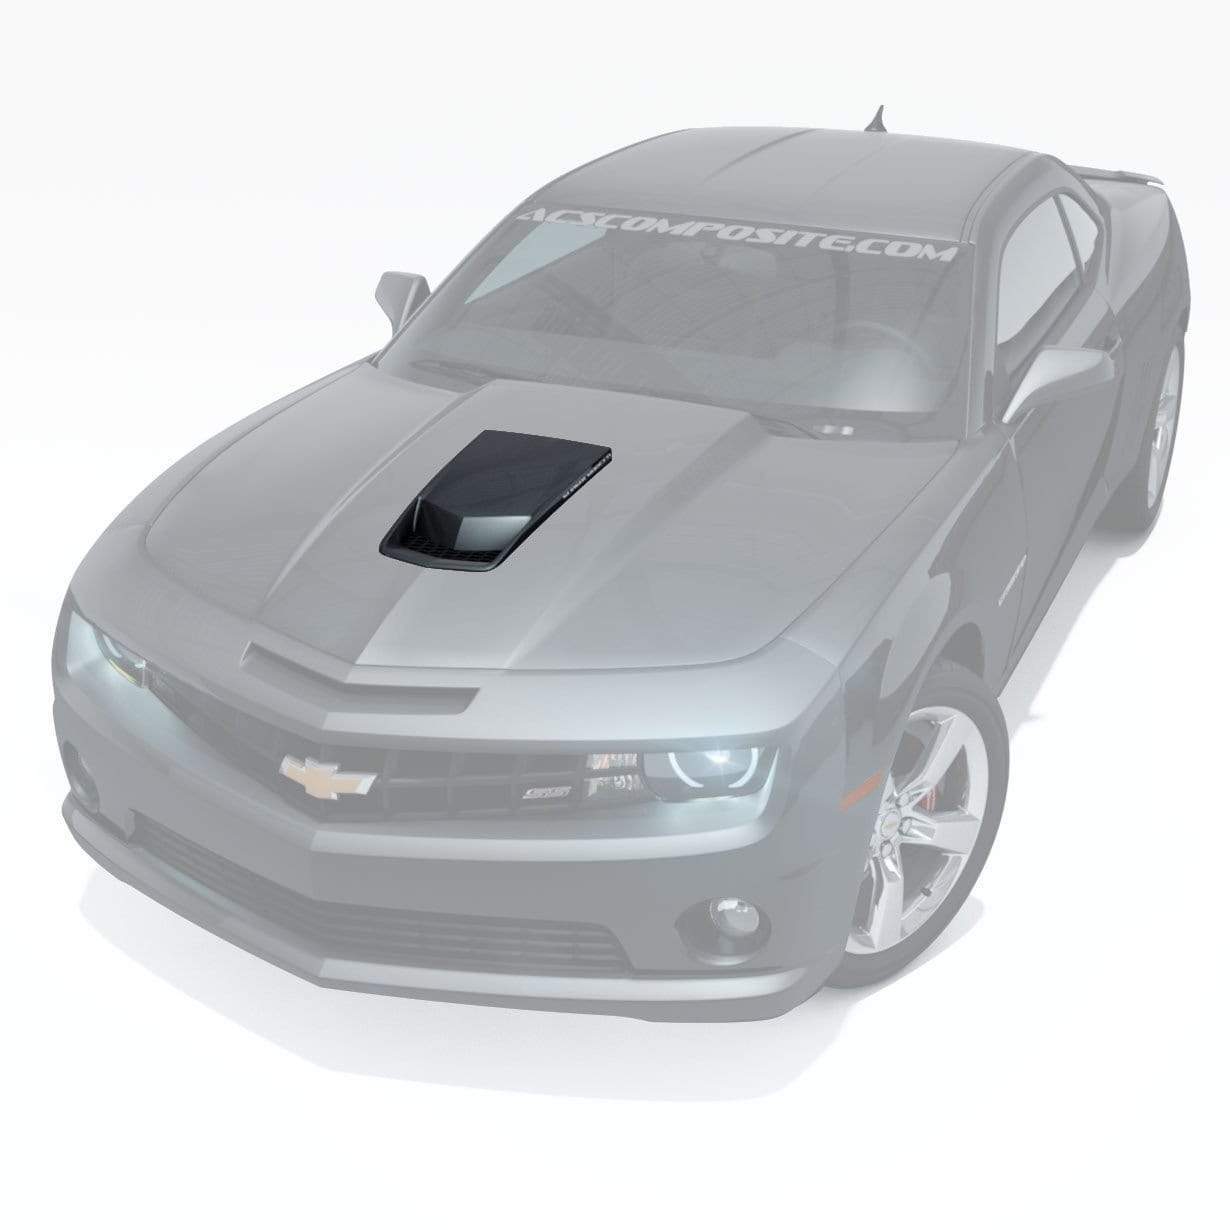 ACS TLE Hood Conversion Kit for Camaro 2010-2015 SS LS LT RS - Pn 33-4-173: Optimal engine heat management and style upgrade.